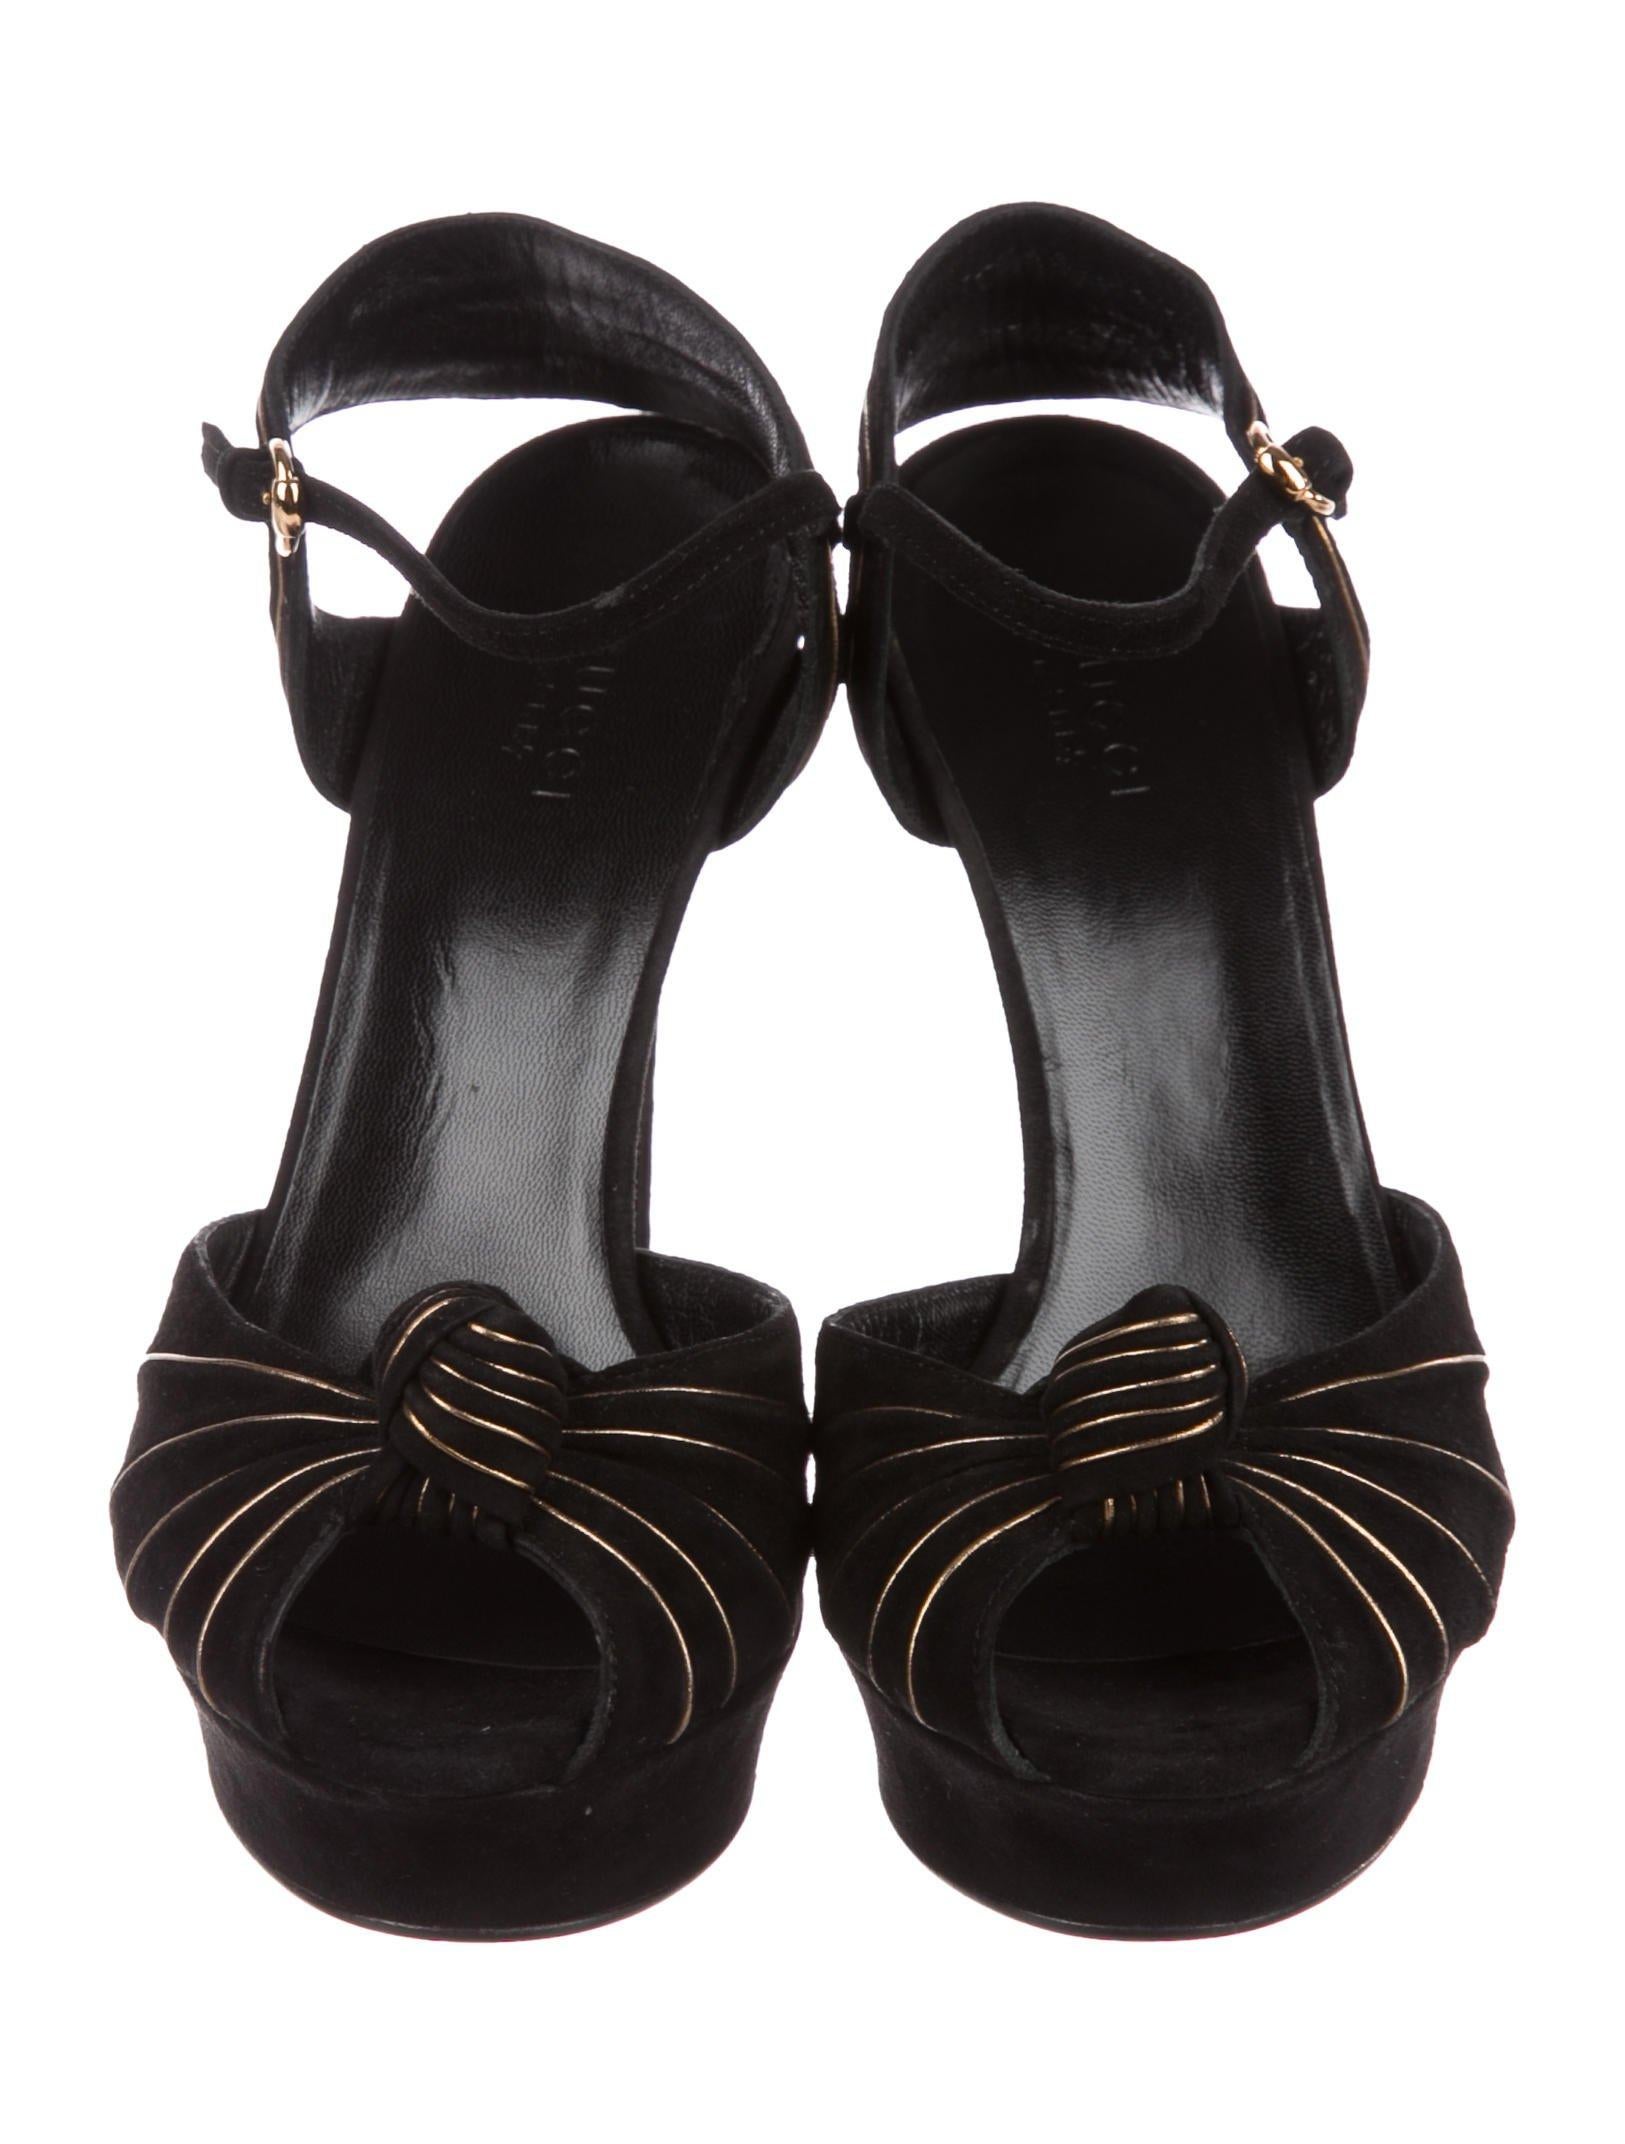 Gucci NEW Black Suede Gold Stitch Bow Evening Sandals Heels in Box

Size IT 36
Suede
Gold detail
Ankle buckle closure
Heel height 4.75